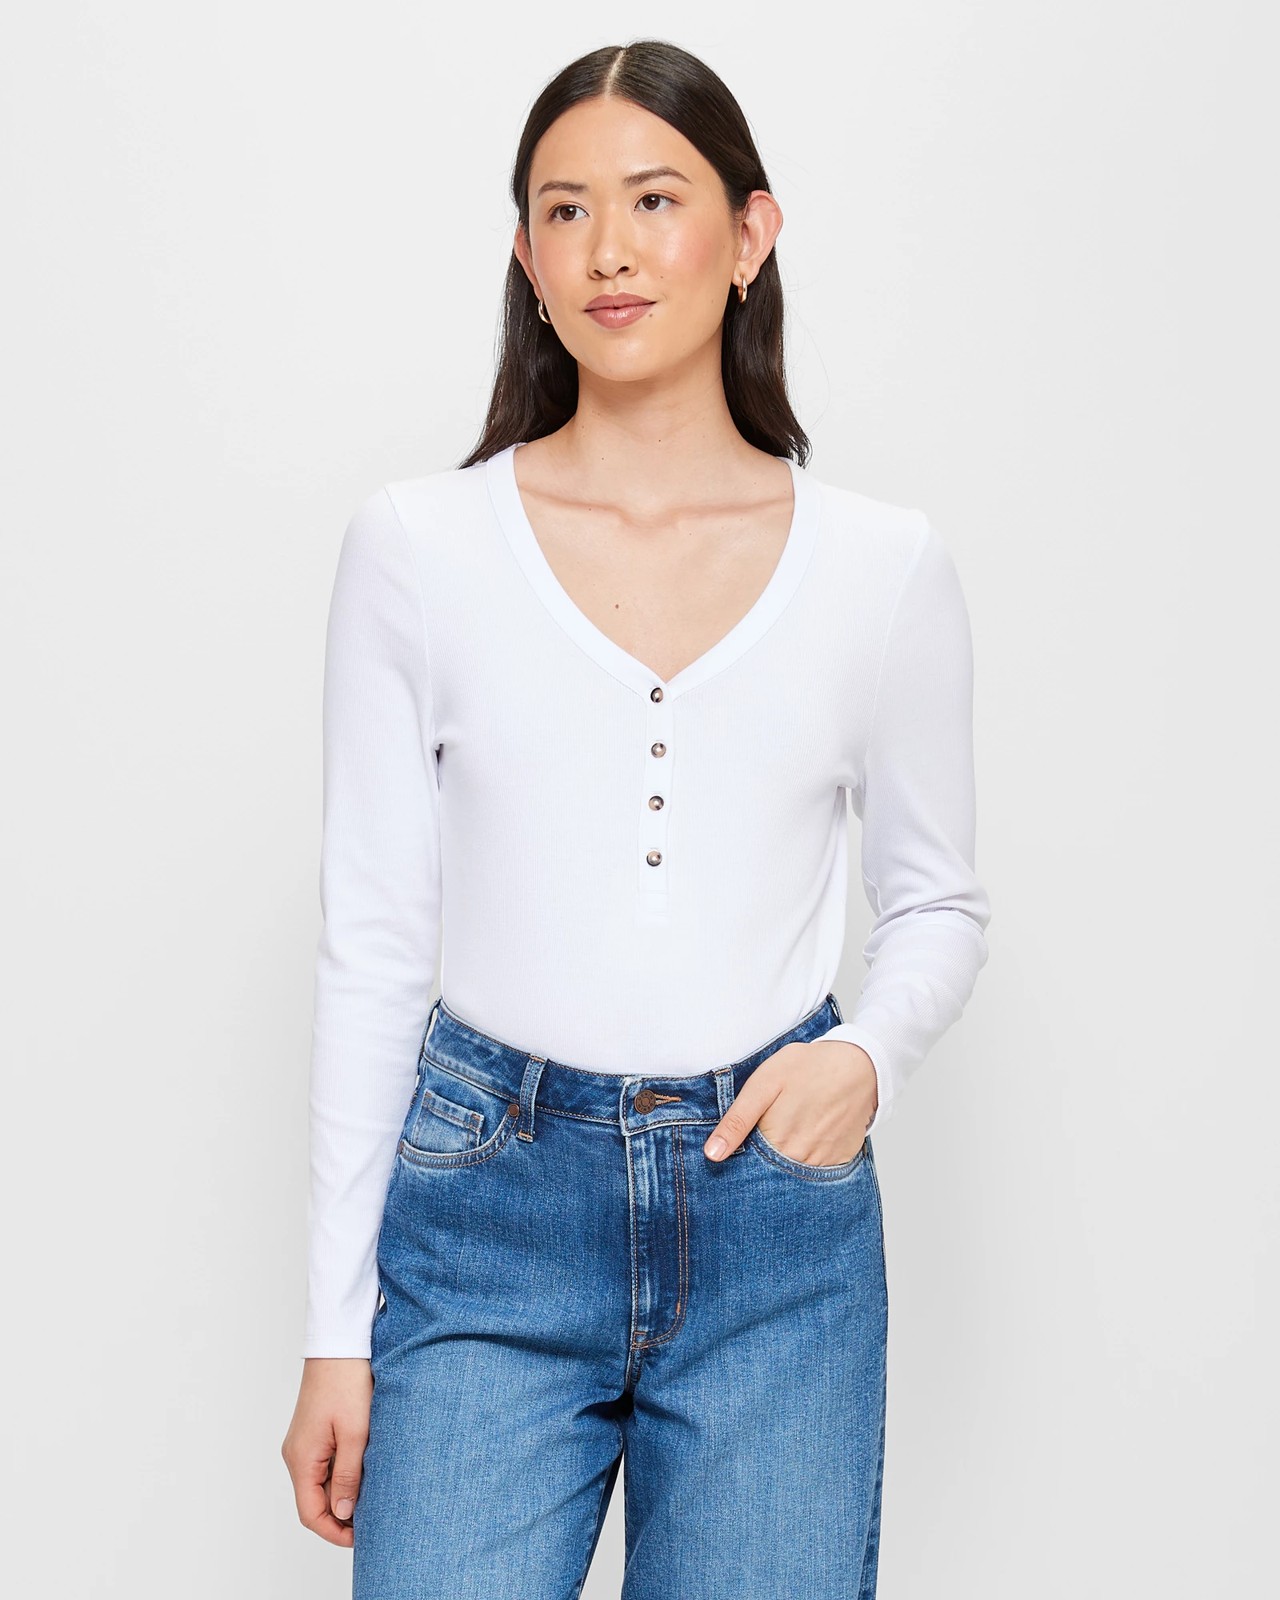 White Ribbed Henley Long Sleeve Top